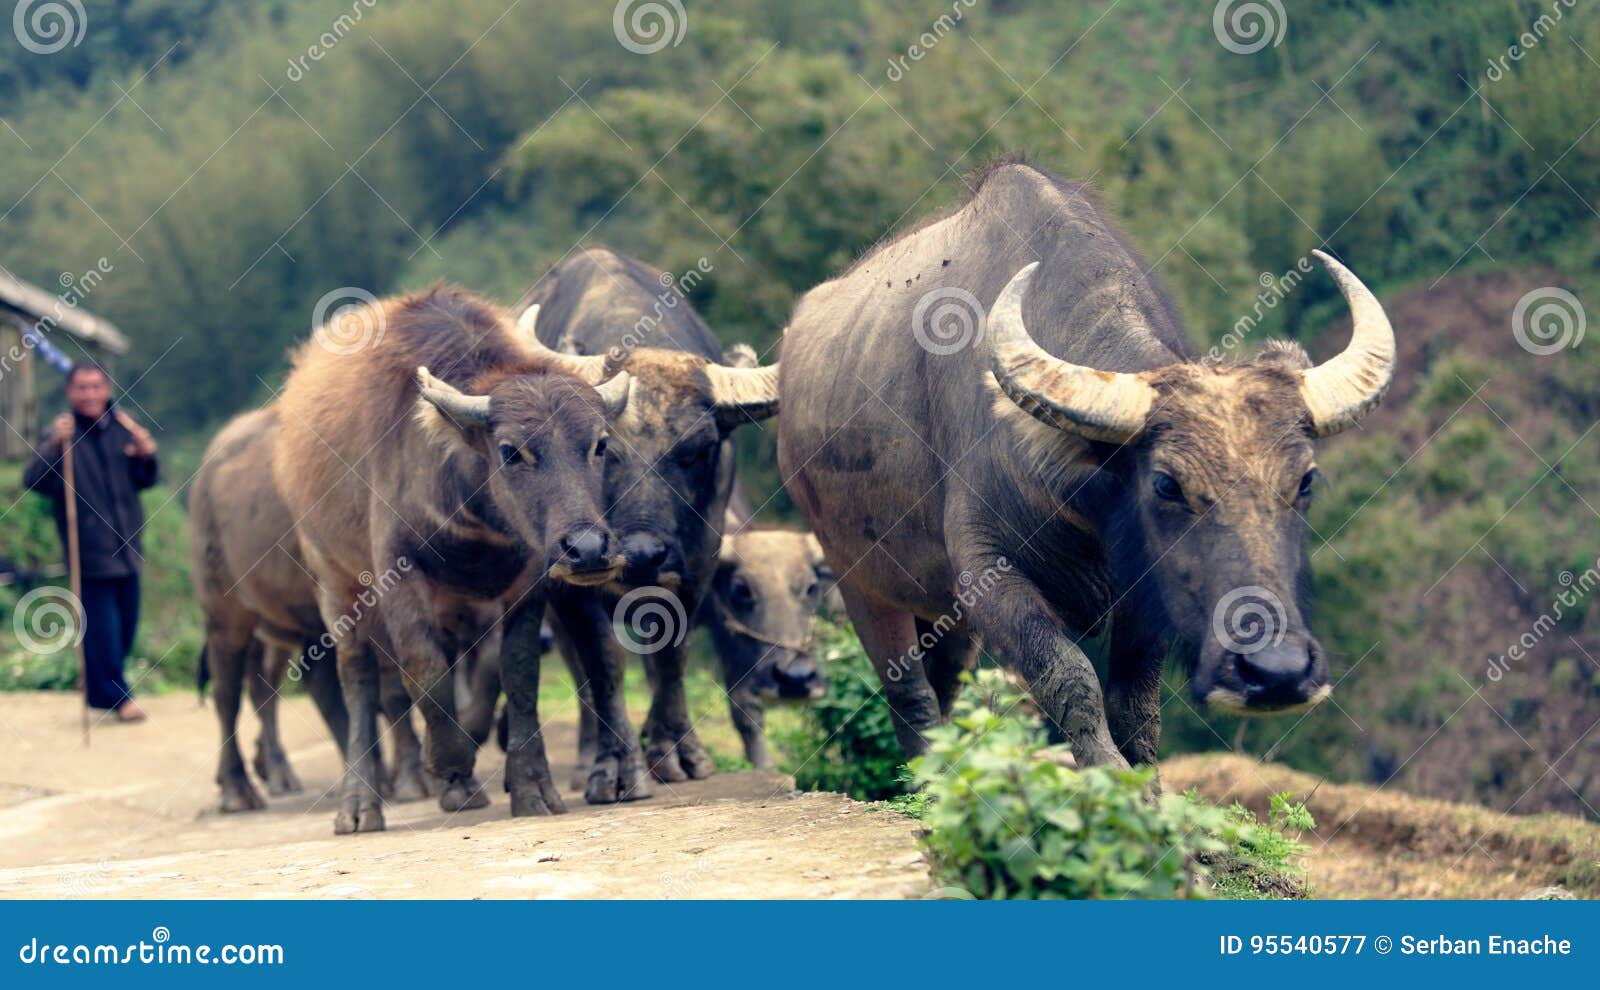 herder with buffaloes in sapa valley